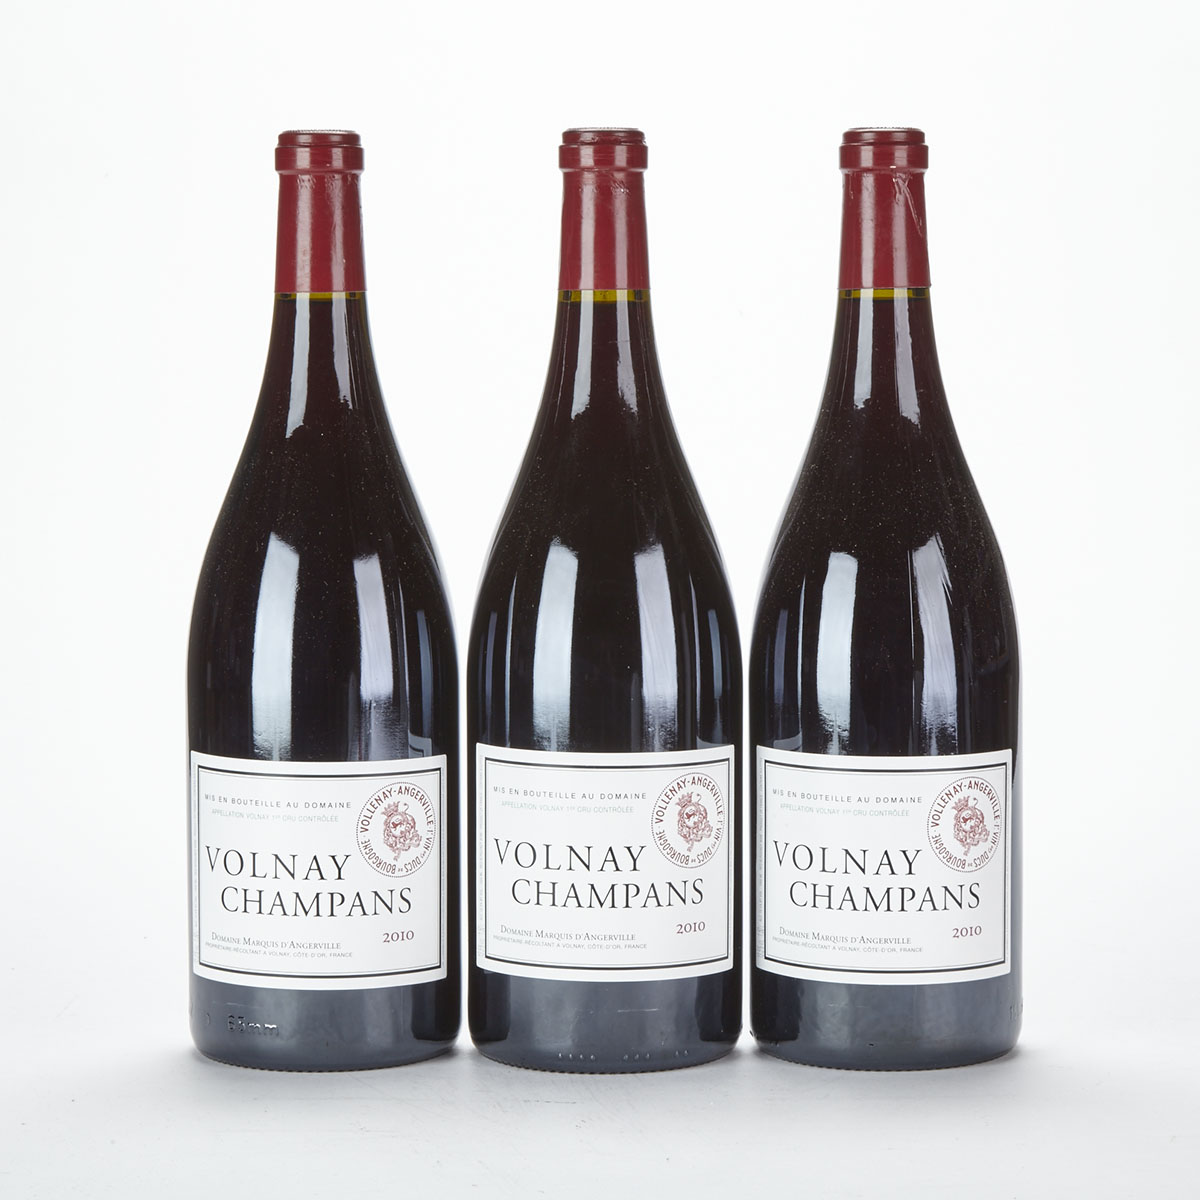 DOMAINE MARQUIS D'ANGERVILLE VOLNAY CHAMPANS 2010 (3 MAG.)